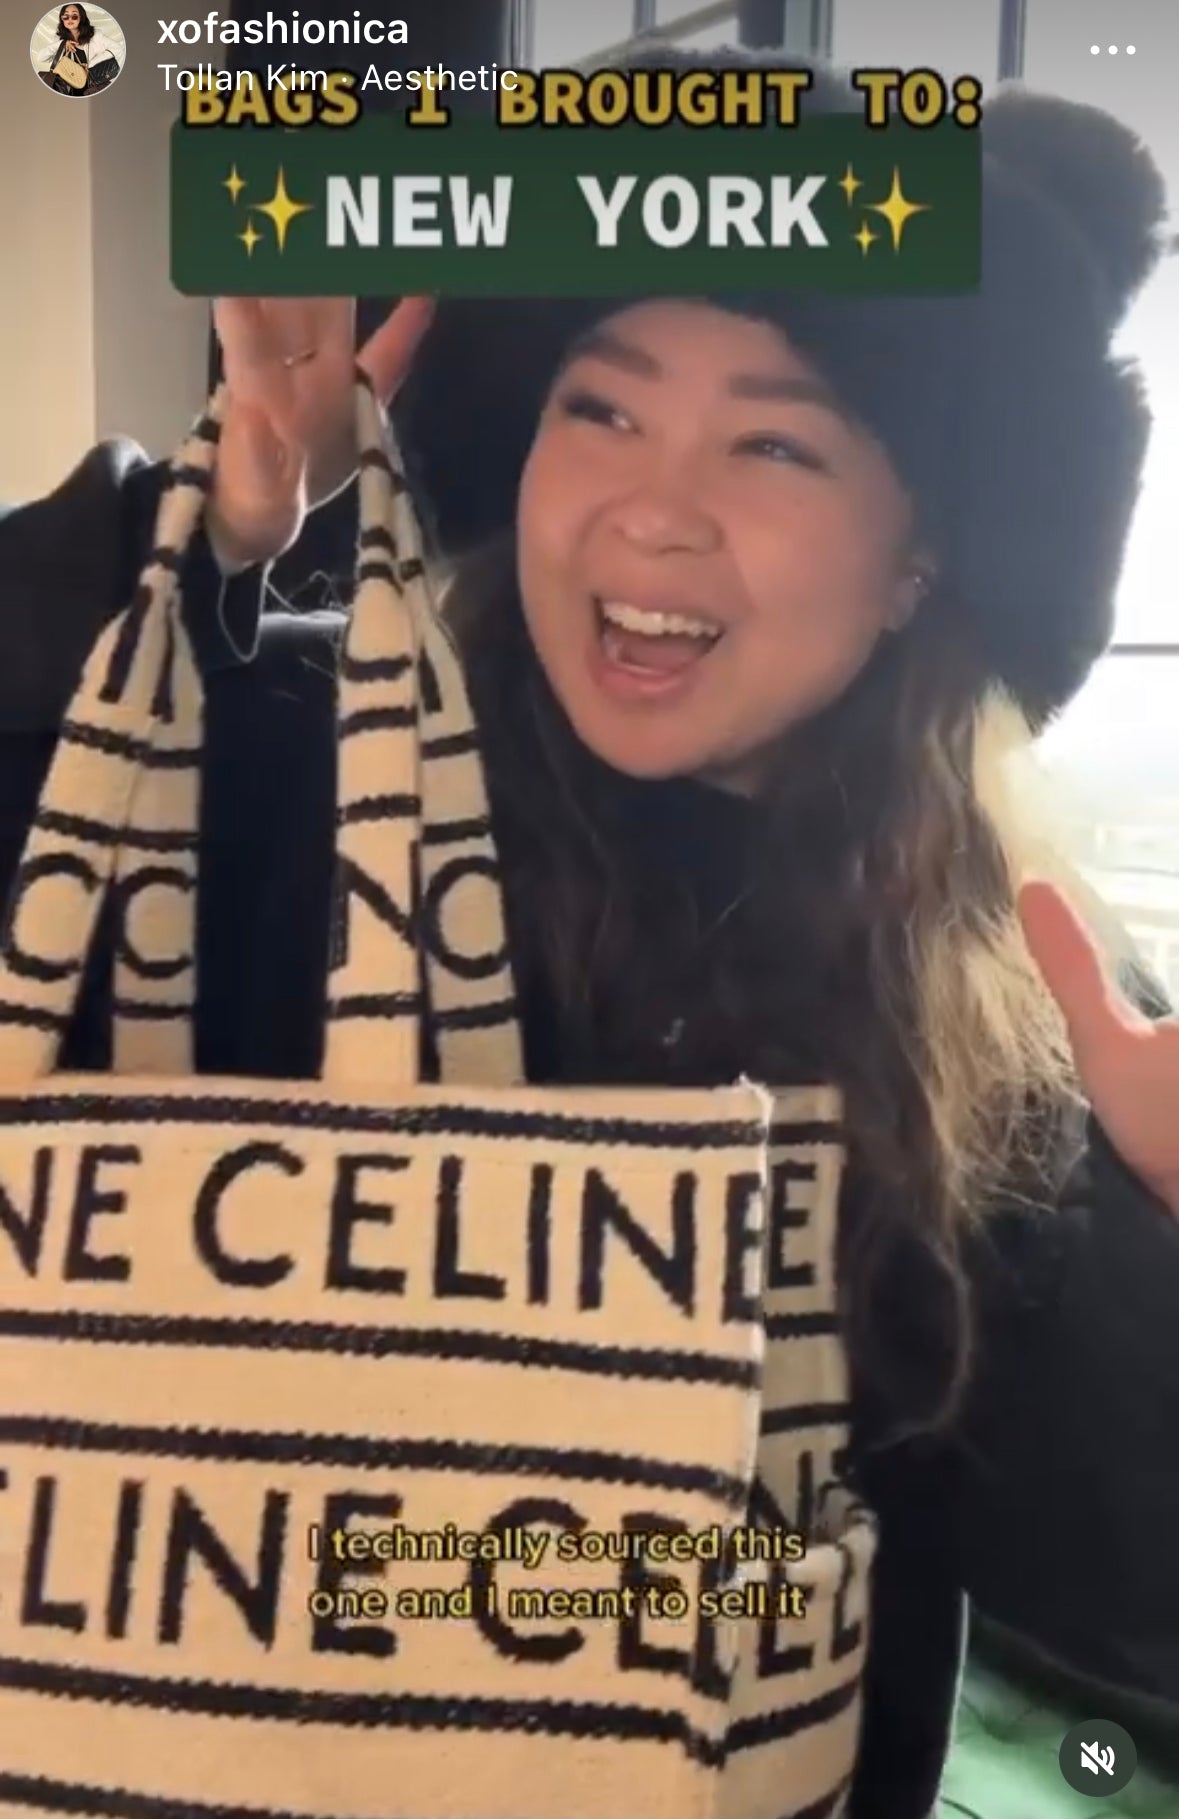 Celine 2022 Large All Over Cabas Thais Tote